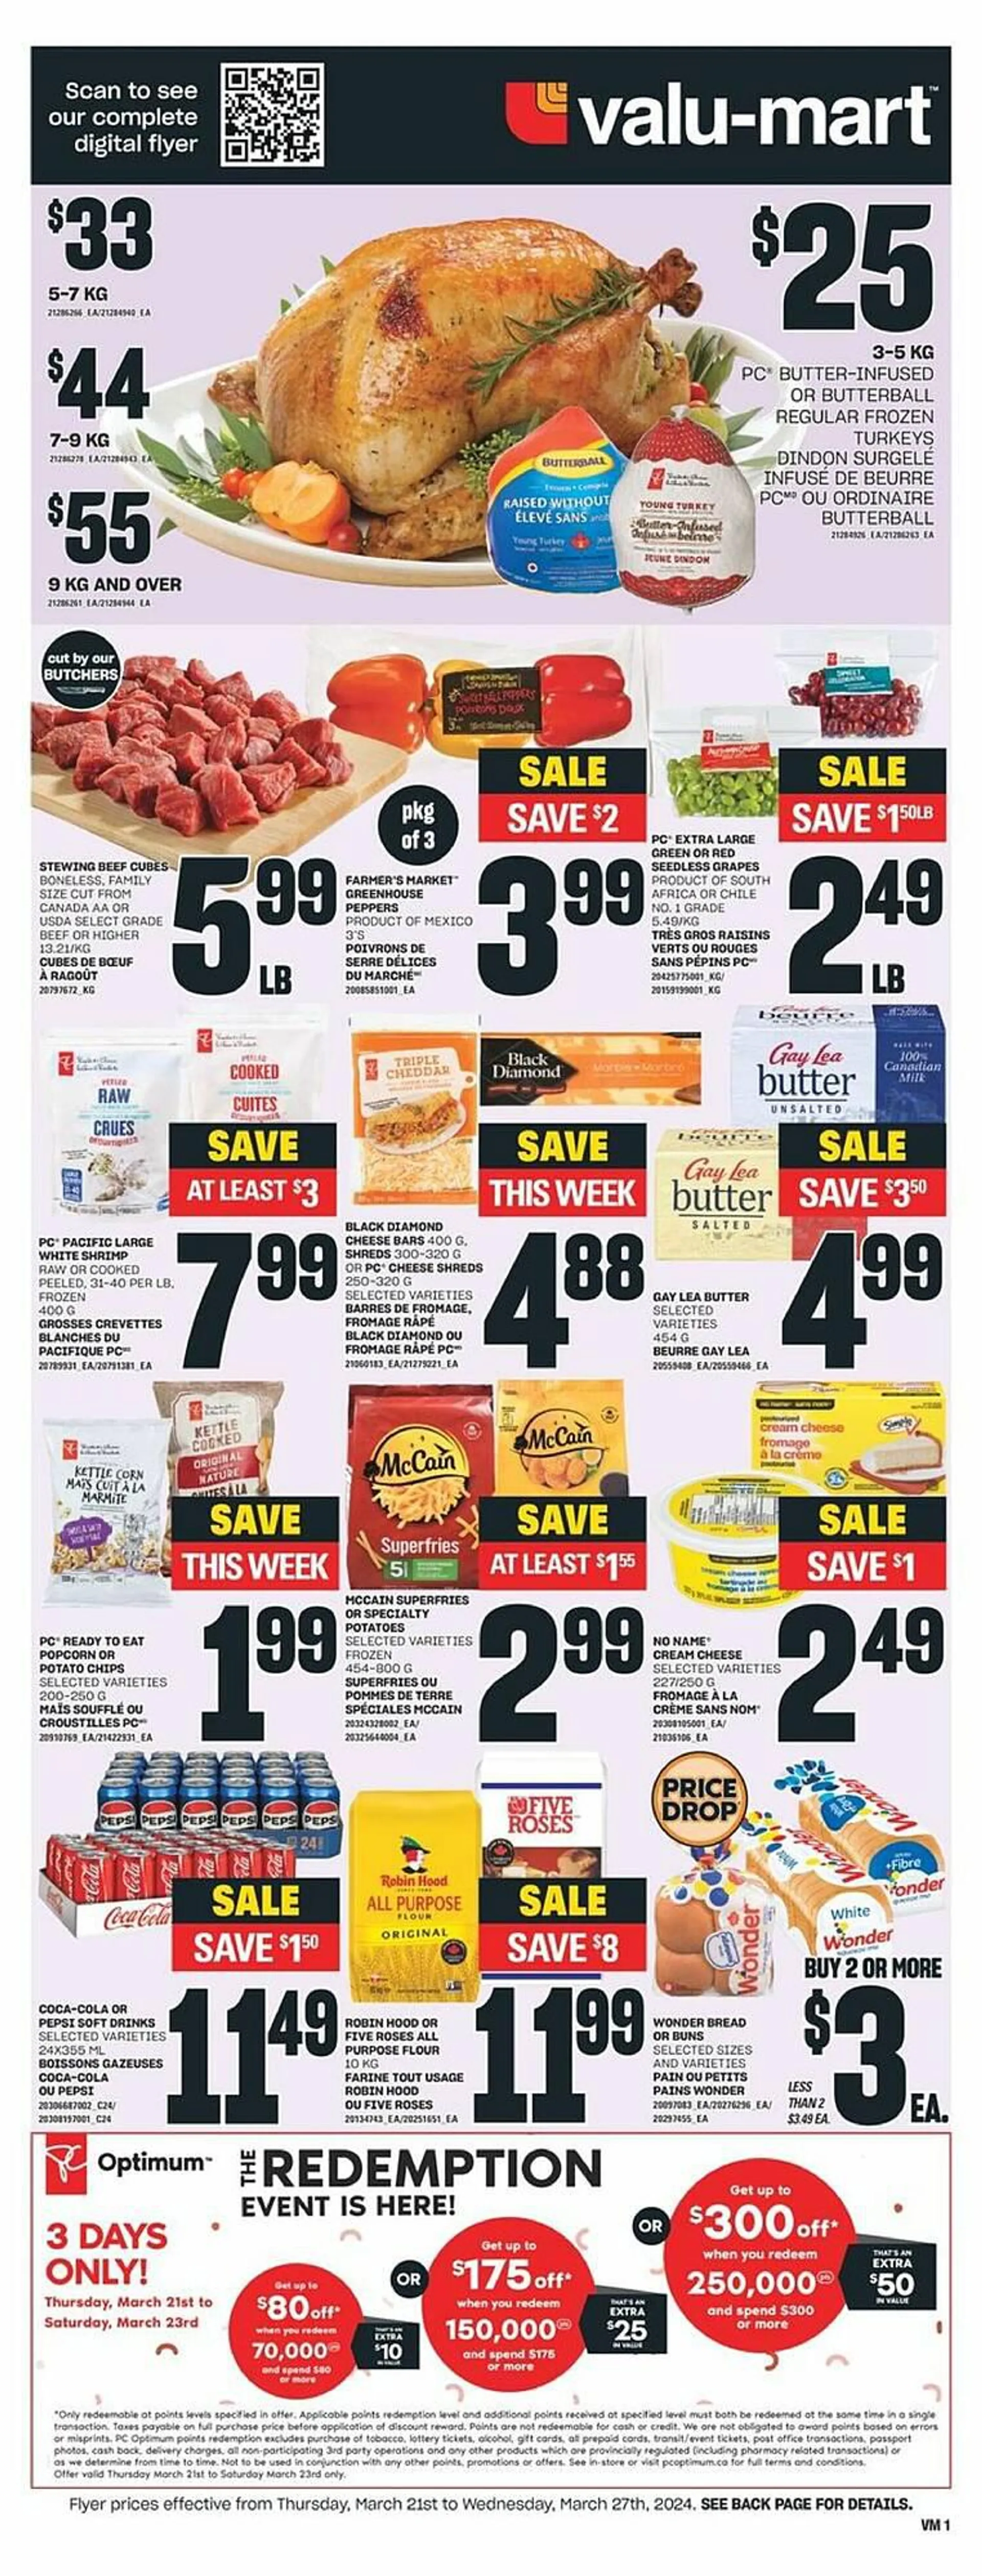 Valu-mart flyer from March 21 to March 28 2024 - flyer page 1